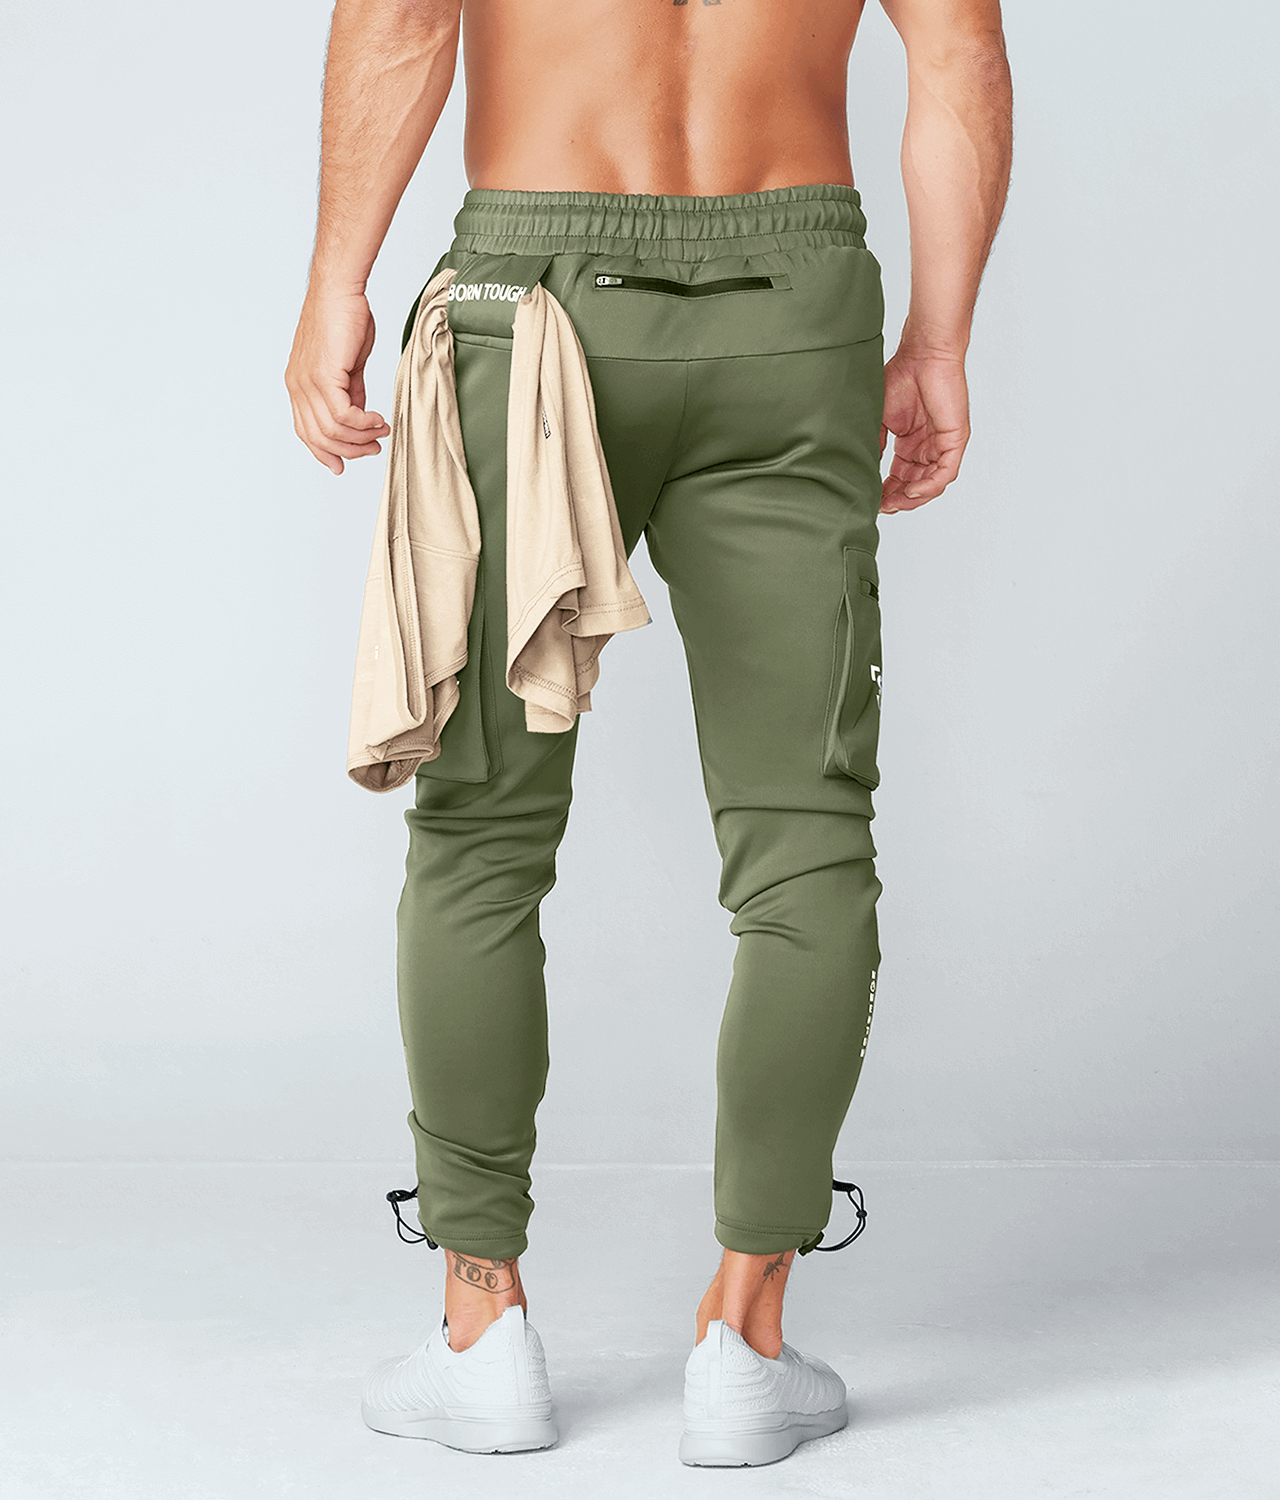 QUILTED Pants/green Quilted Pants/military Pant Liners/hungarian Military  Pants/vintage Nylon Military Pants/olive Drab/fab208nyc/fab208 - Etsy